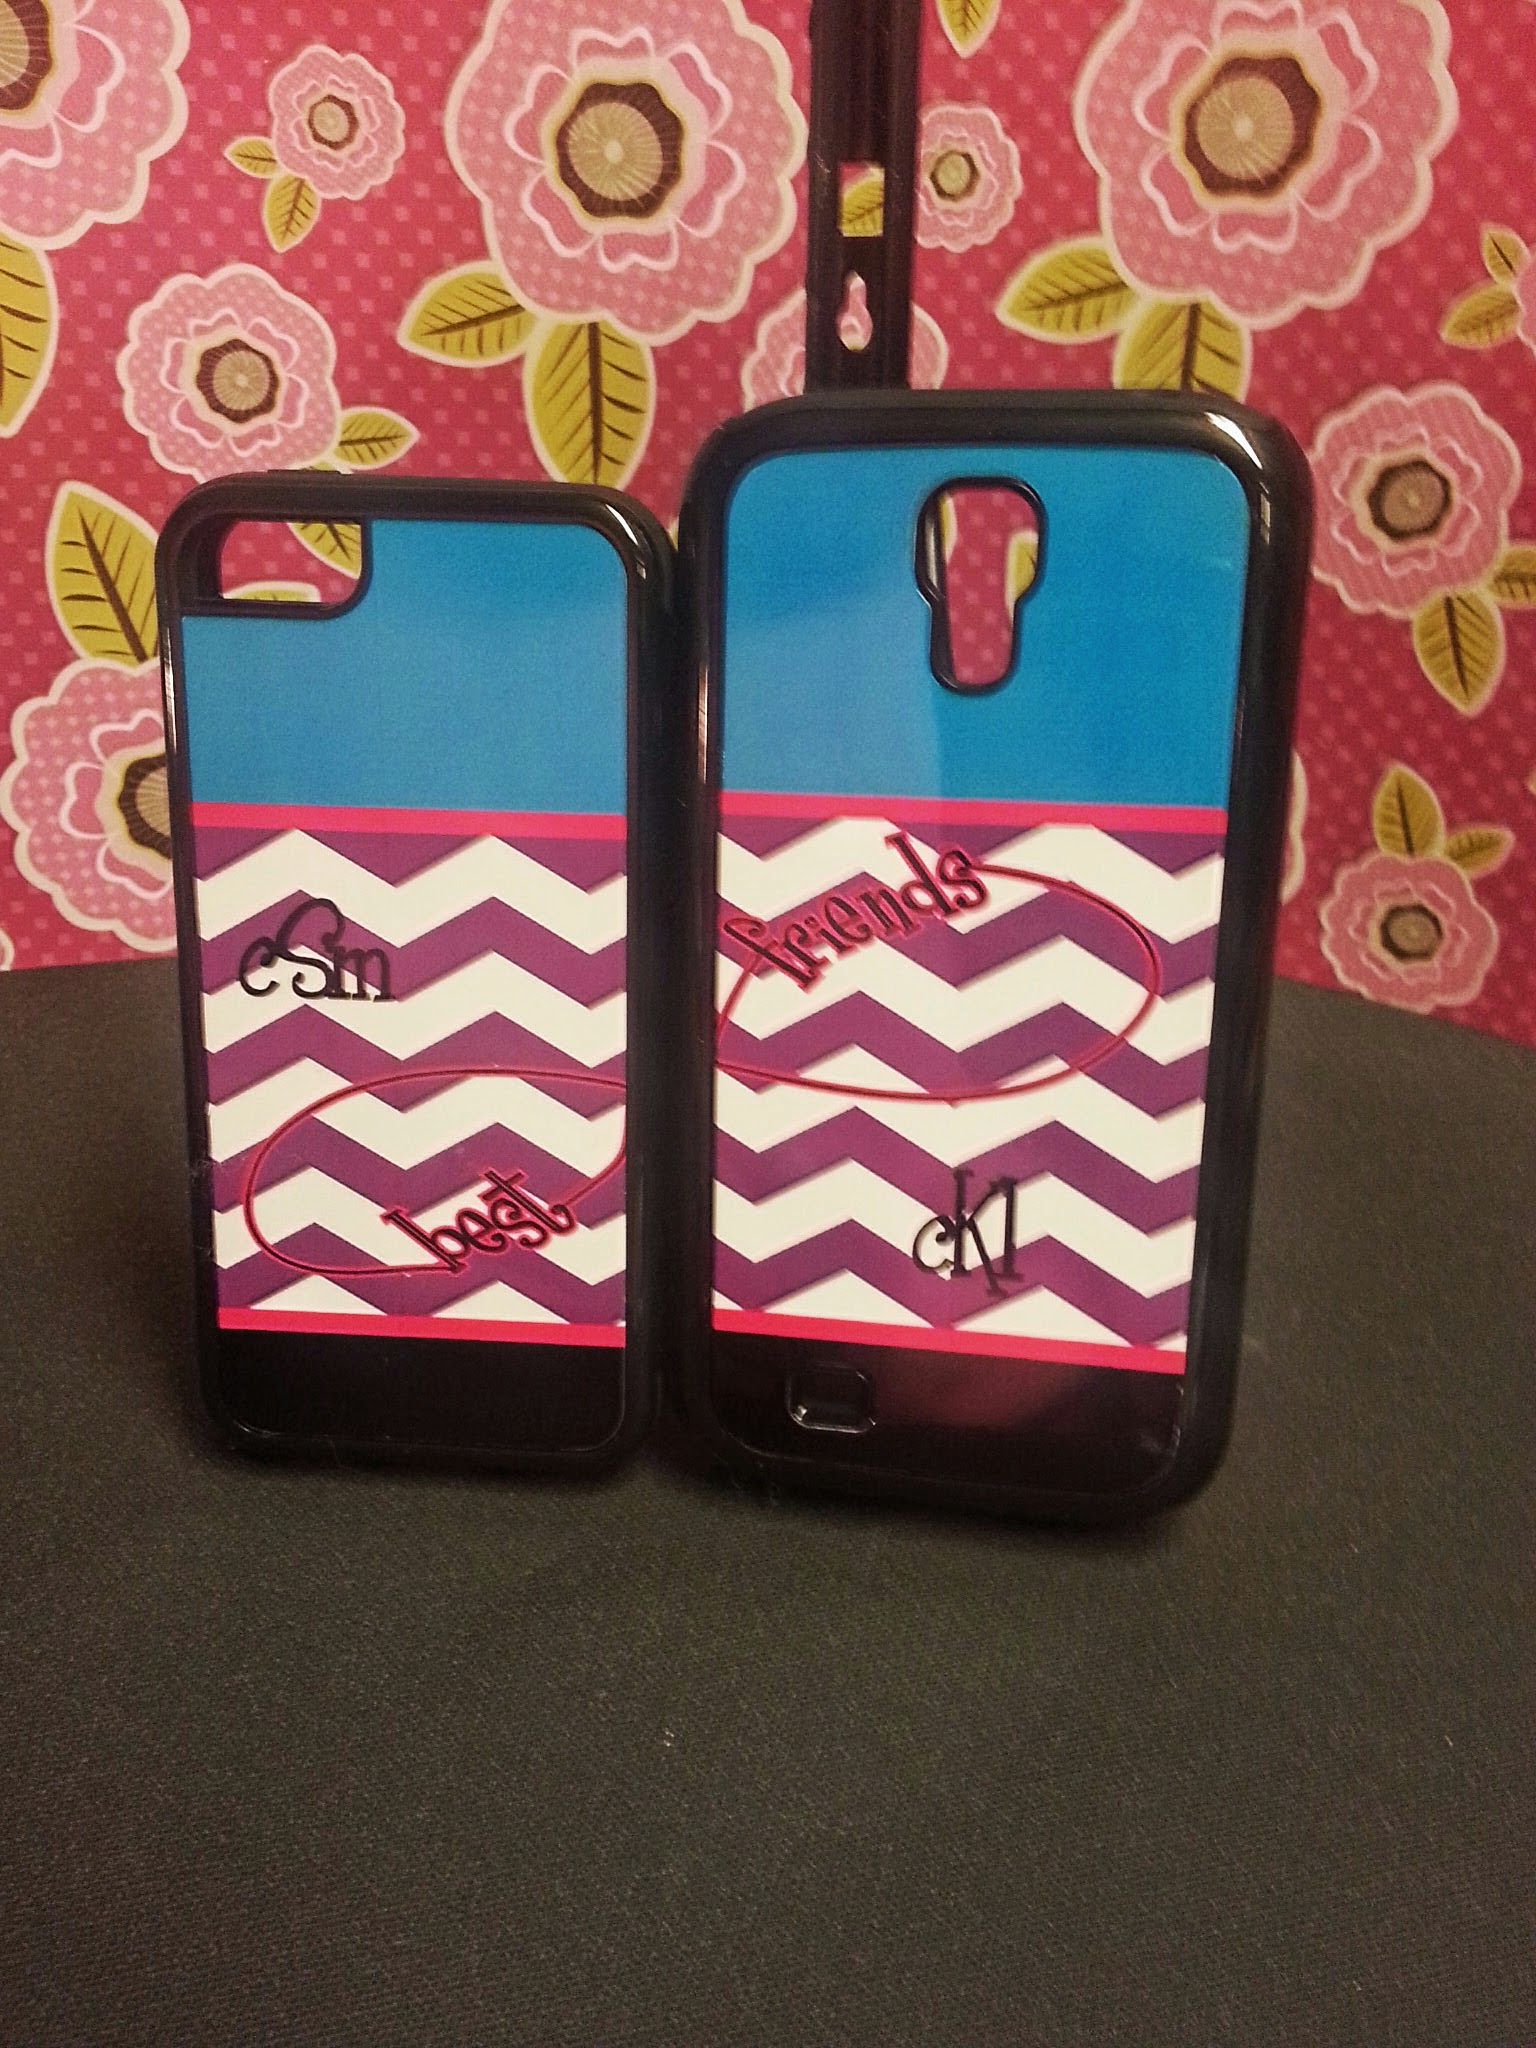 Smart Phones made with sublimation printing